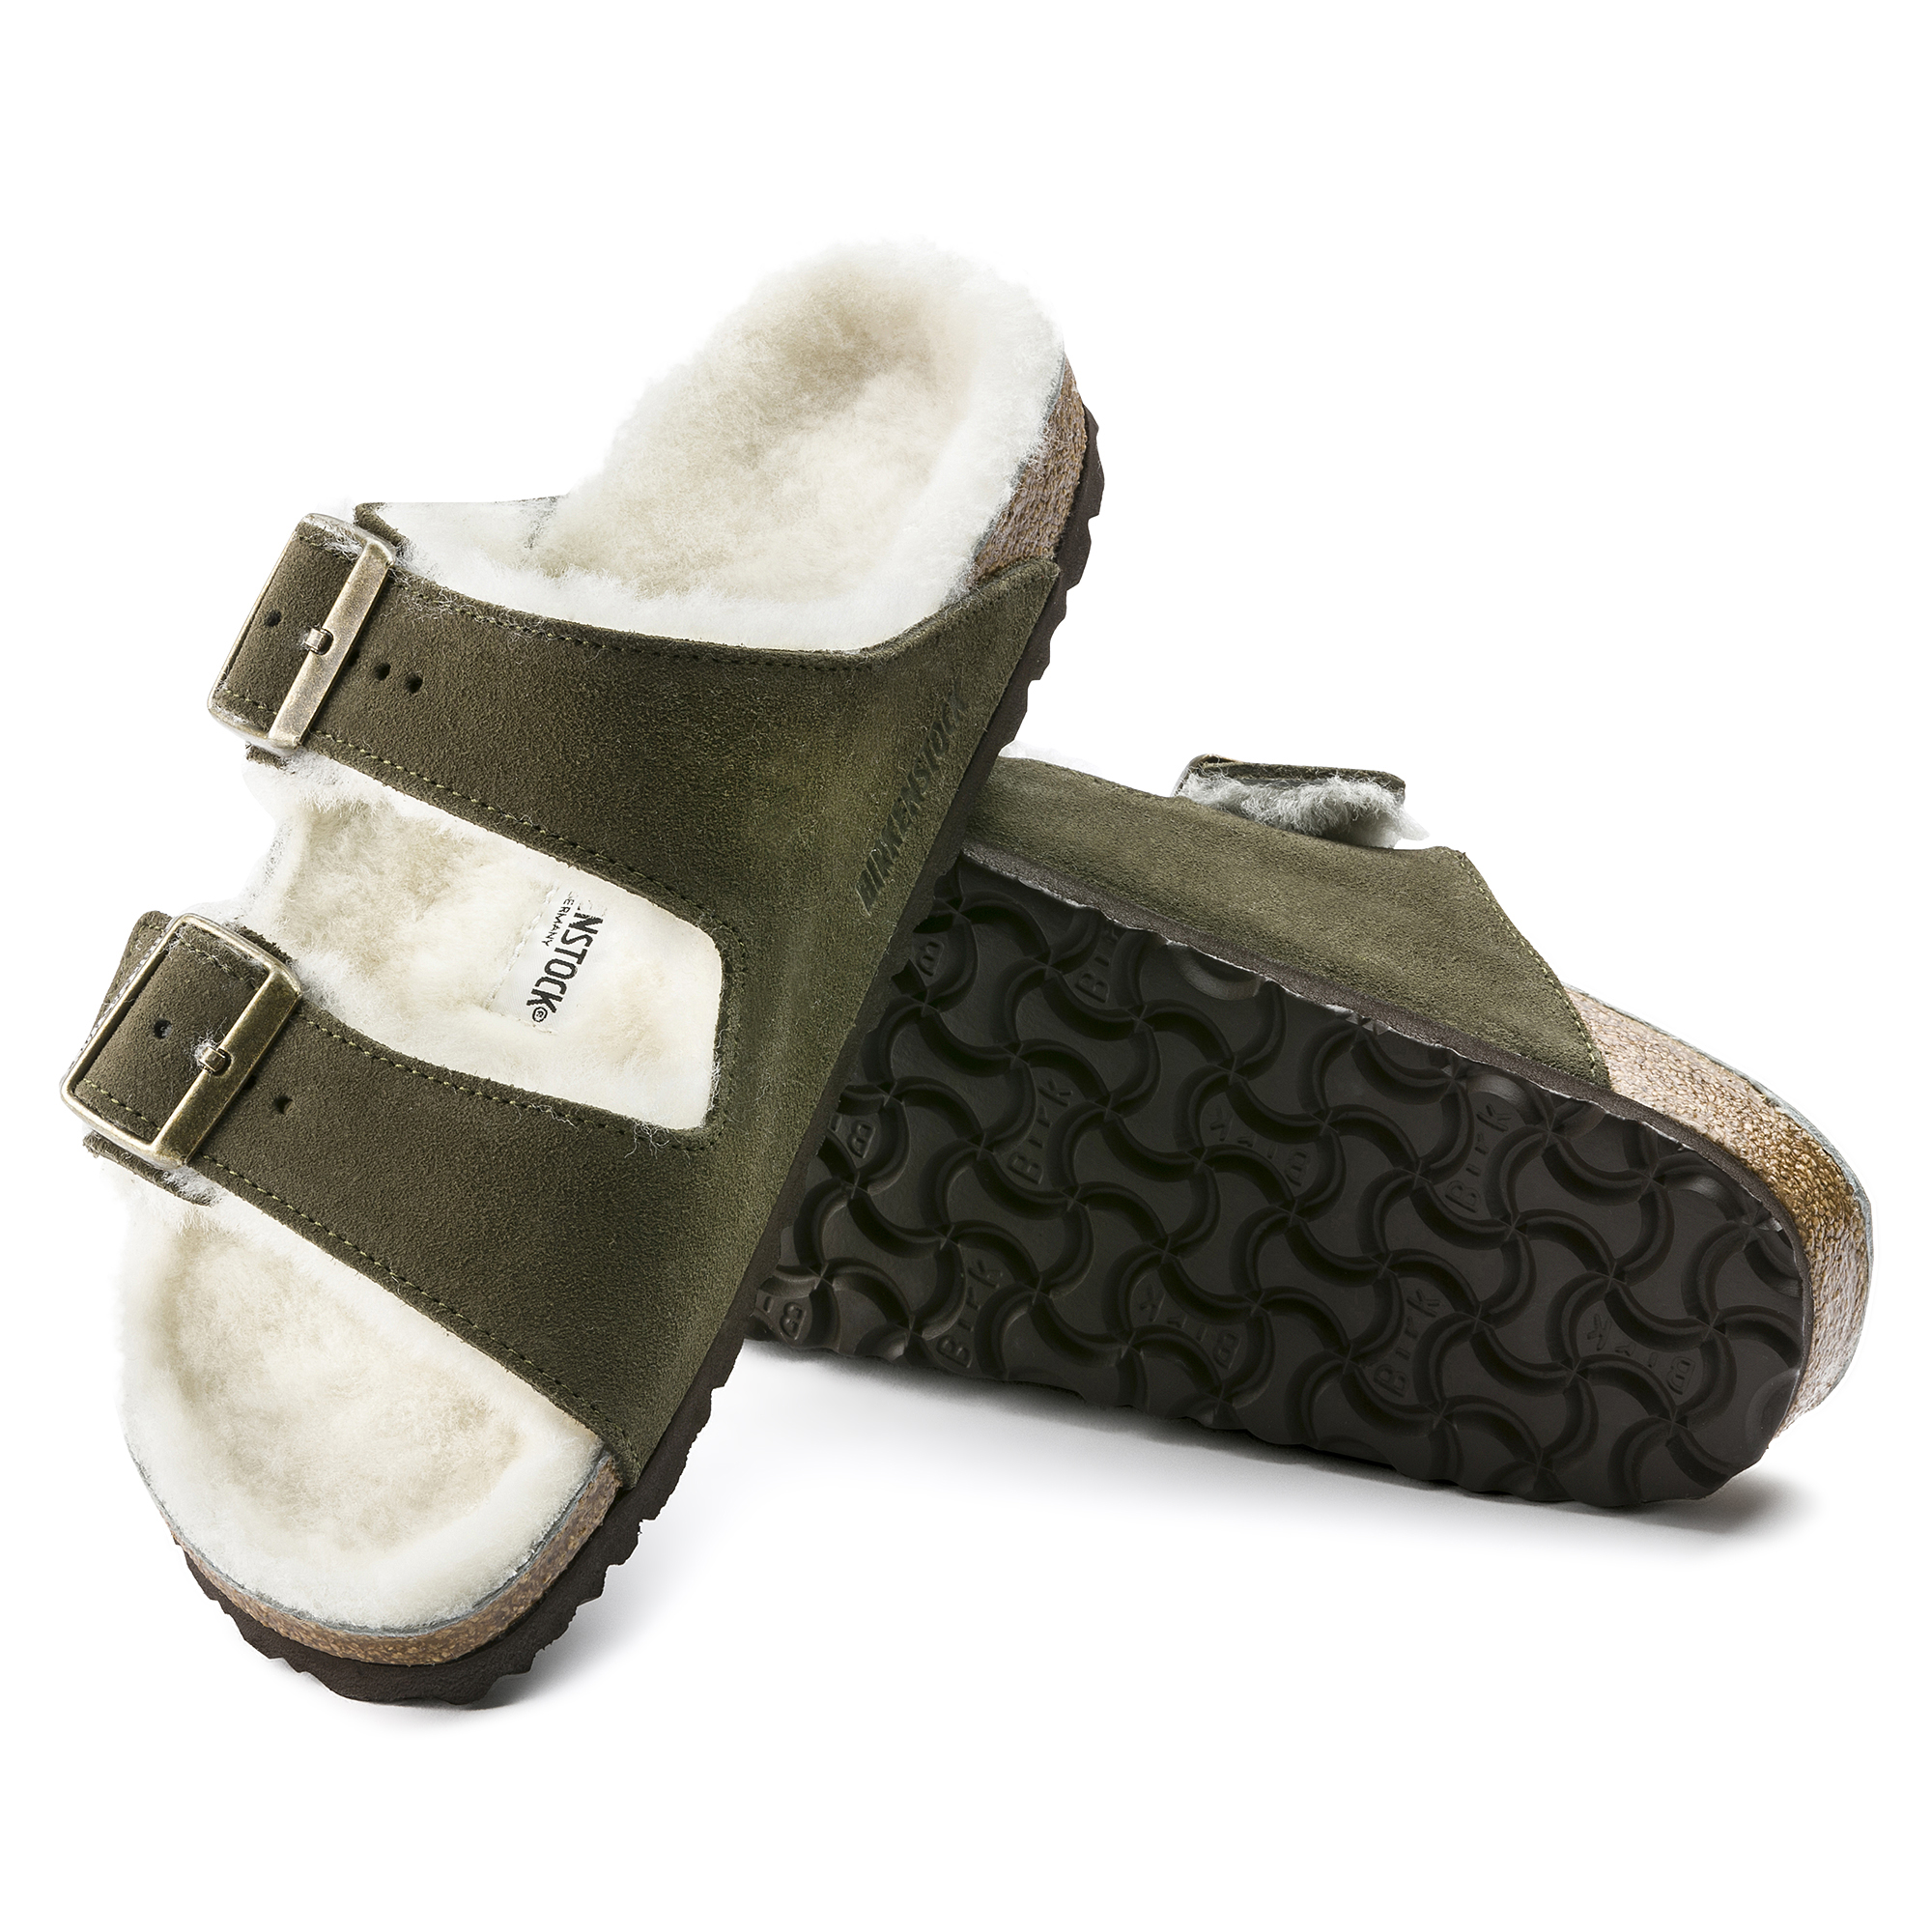 Arizona Shearling Suede Leather Forest